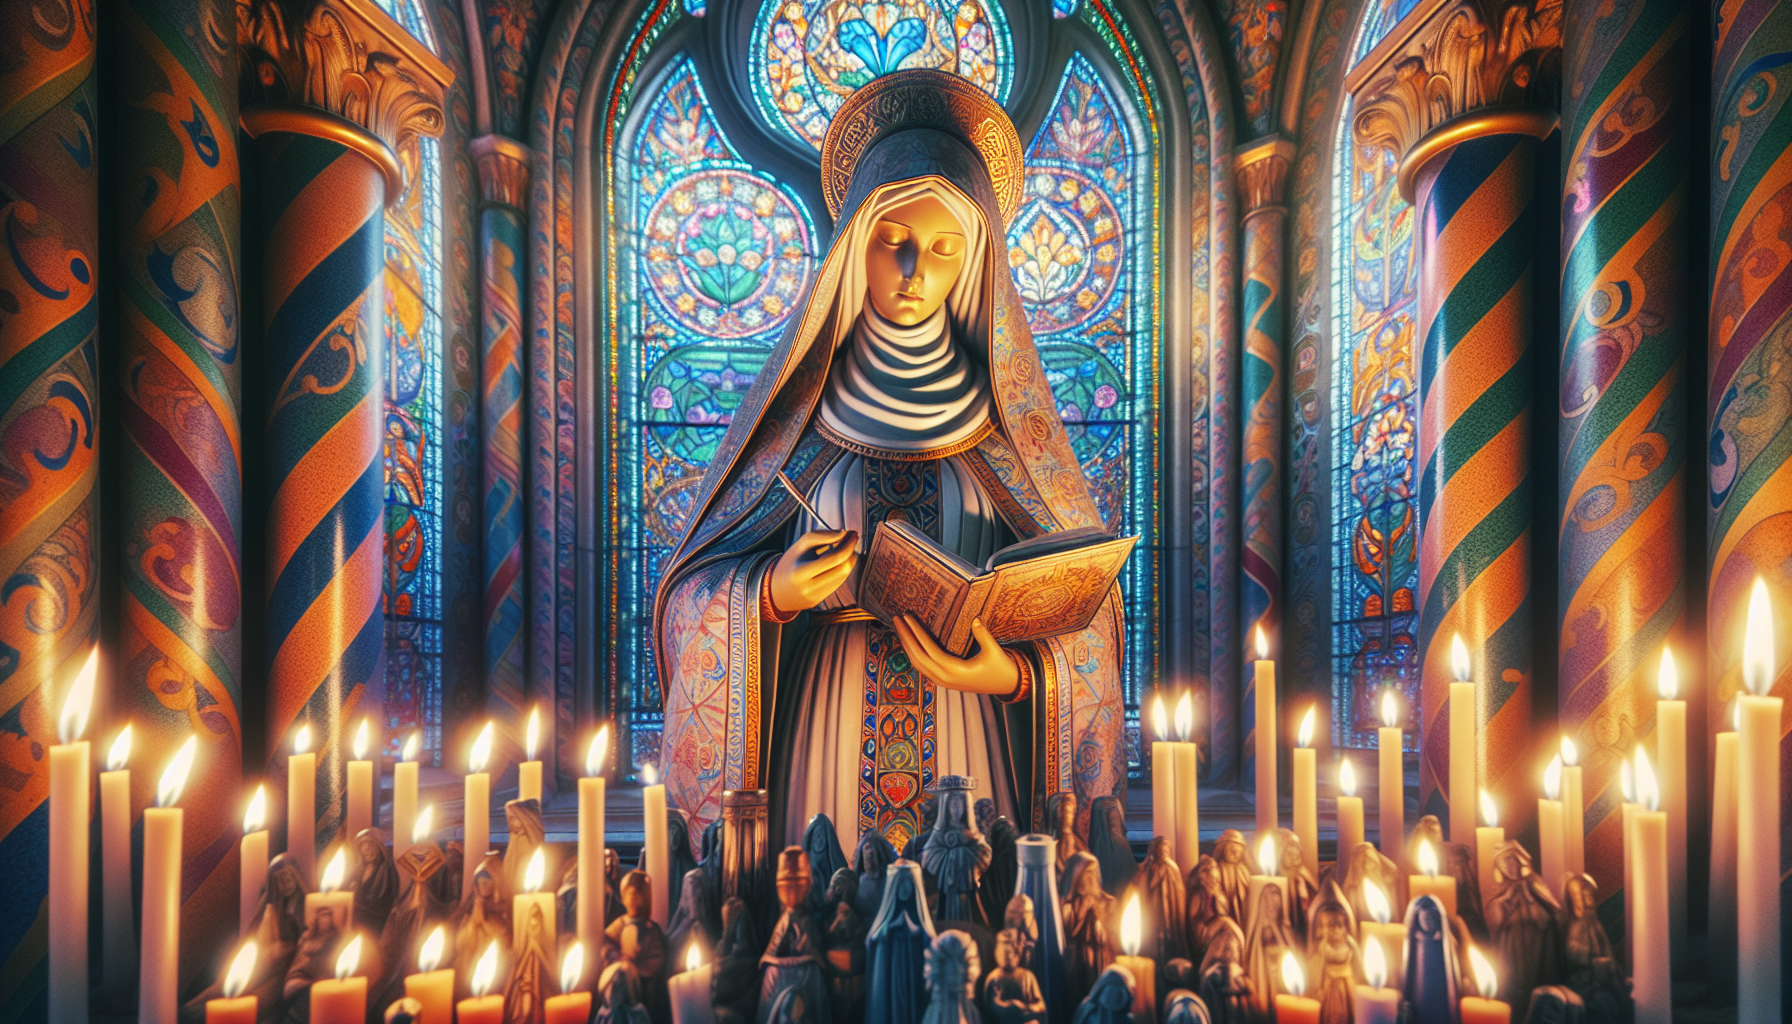 Create an image depicting a serene and sacred setting with a statue of Saint Bridget of Sweden holding a book of prayers. Surround her with soft candlelight and intricate stained glass windows. The at